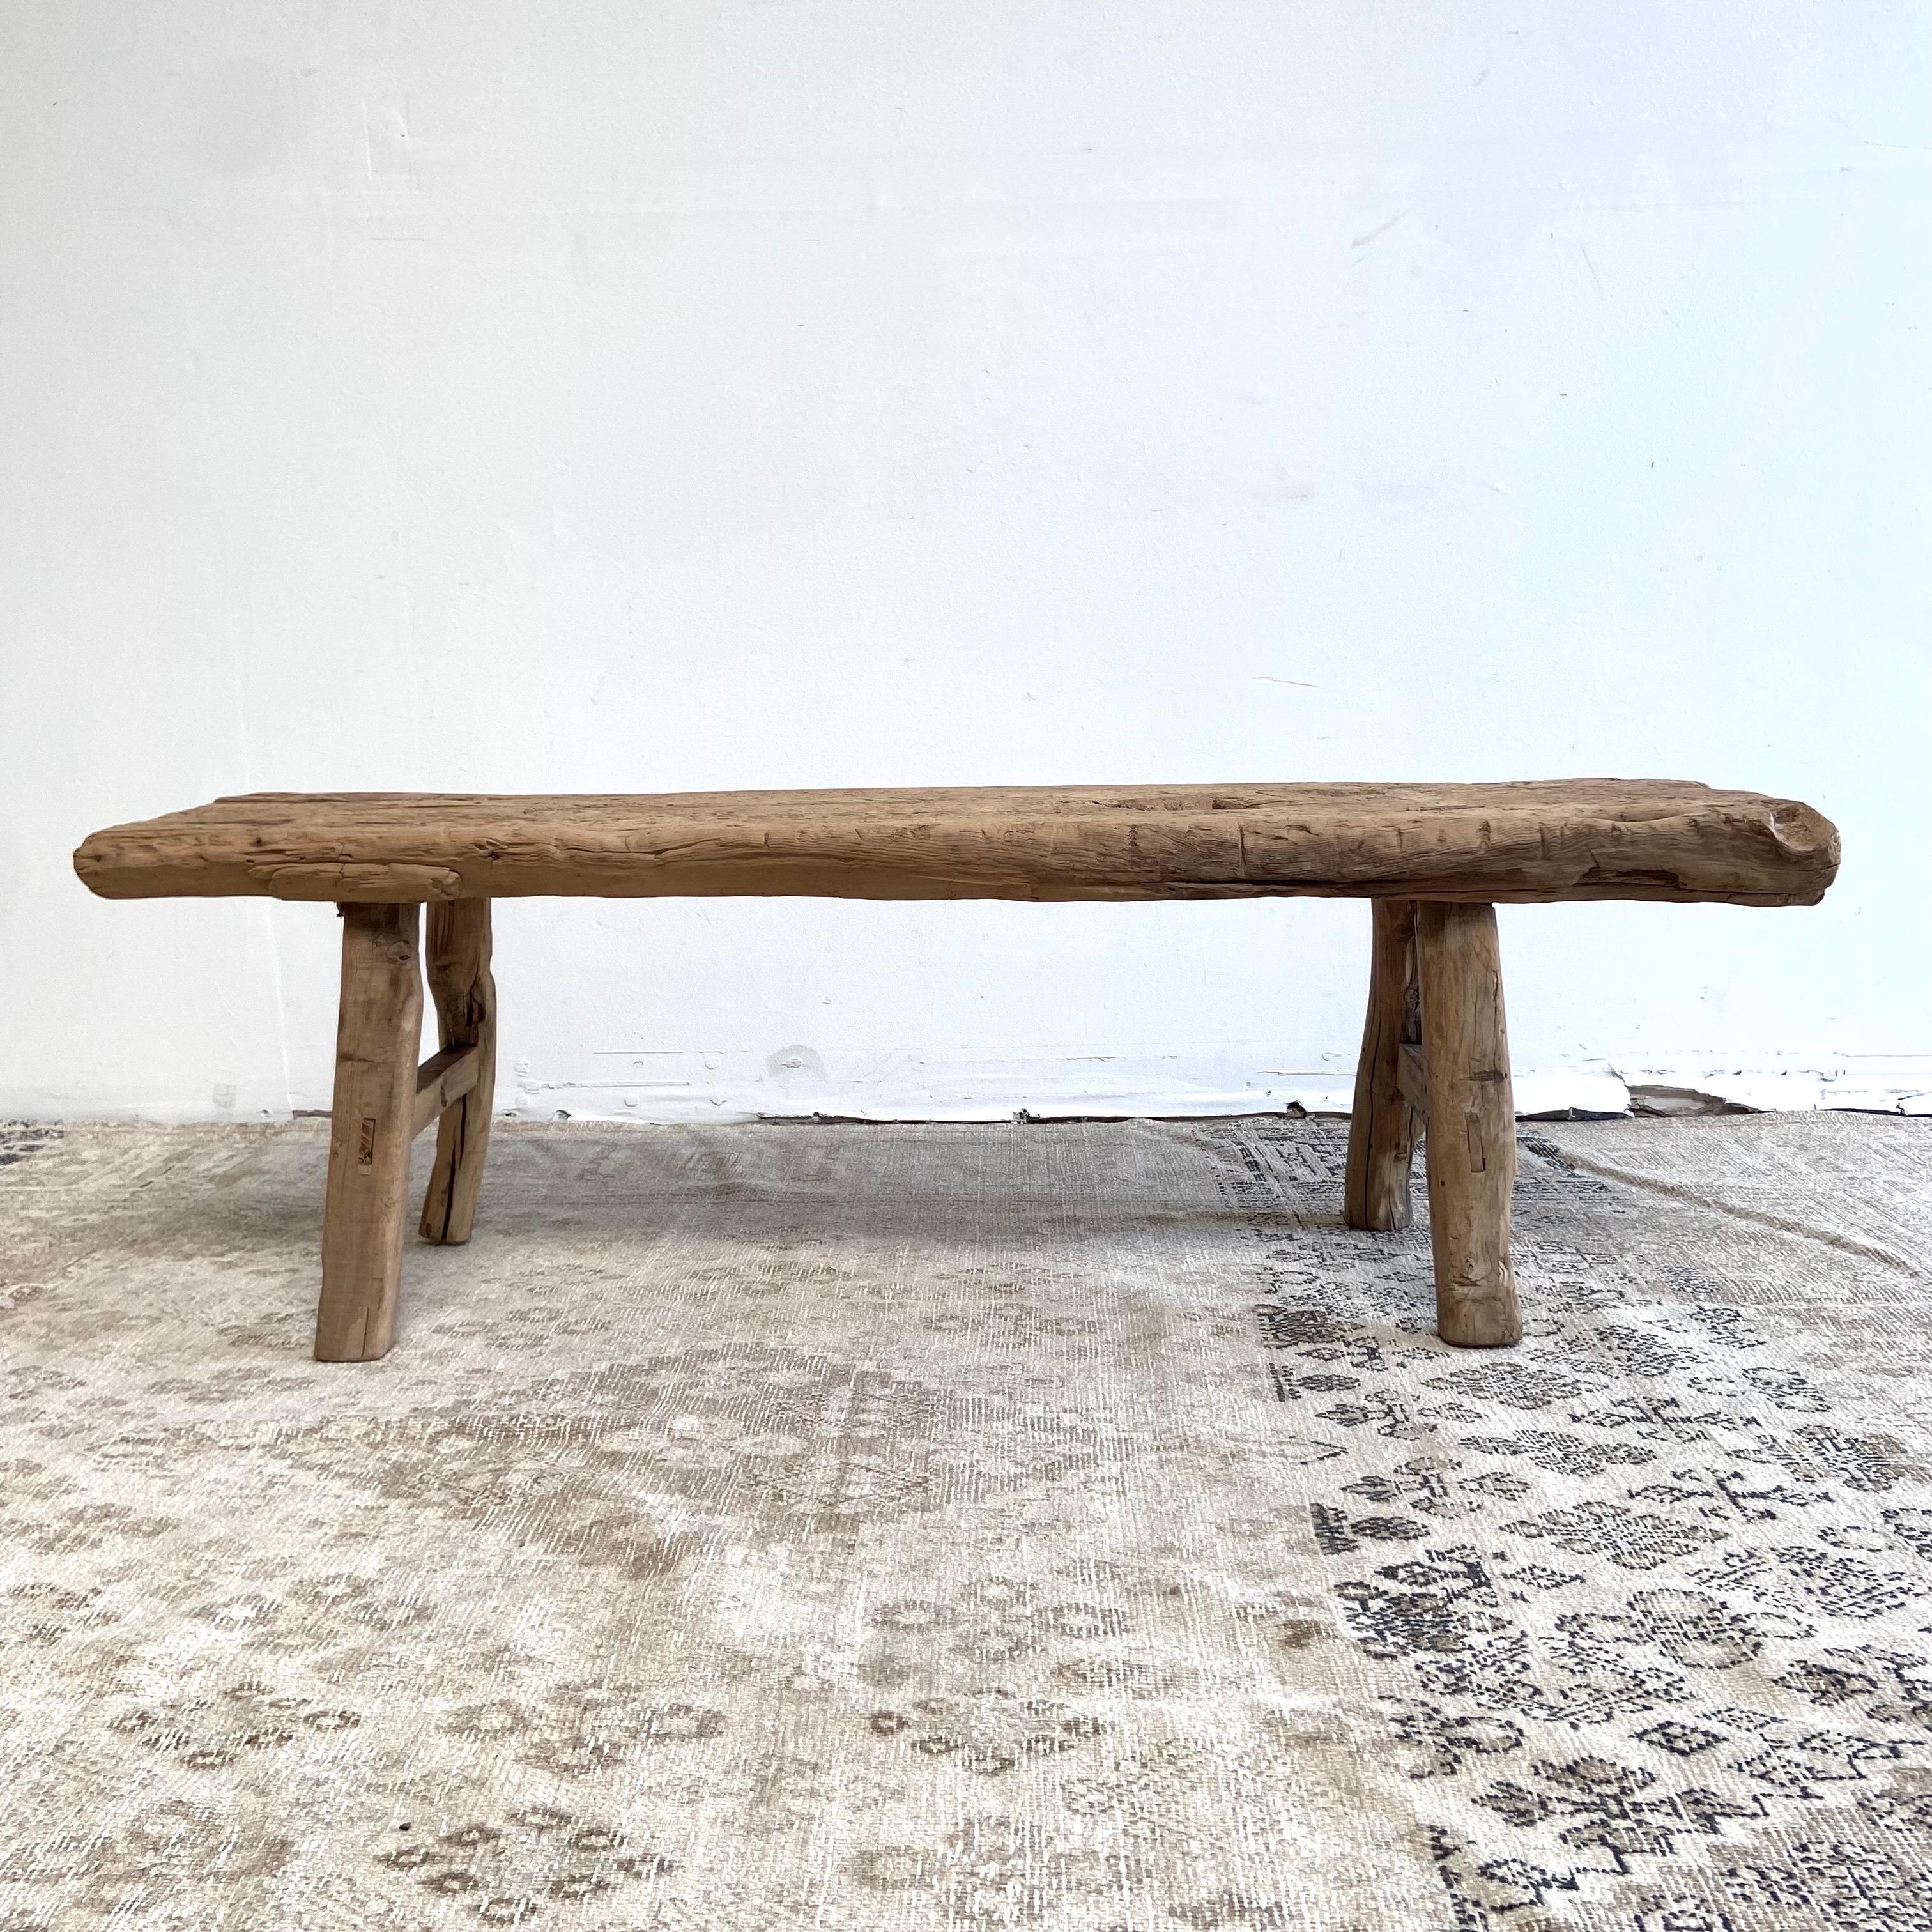 Elm coffee table 62” W x 19-1/2” D x 16” H
Vintage antique elm wood coffee table with beautiful antique weathered patina top. These are the real vintage antique elm wood coffee table! Beautiful antique patina, with weathering and age, these are